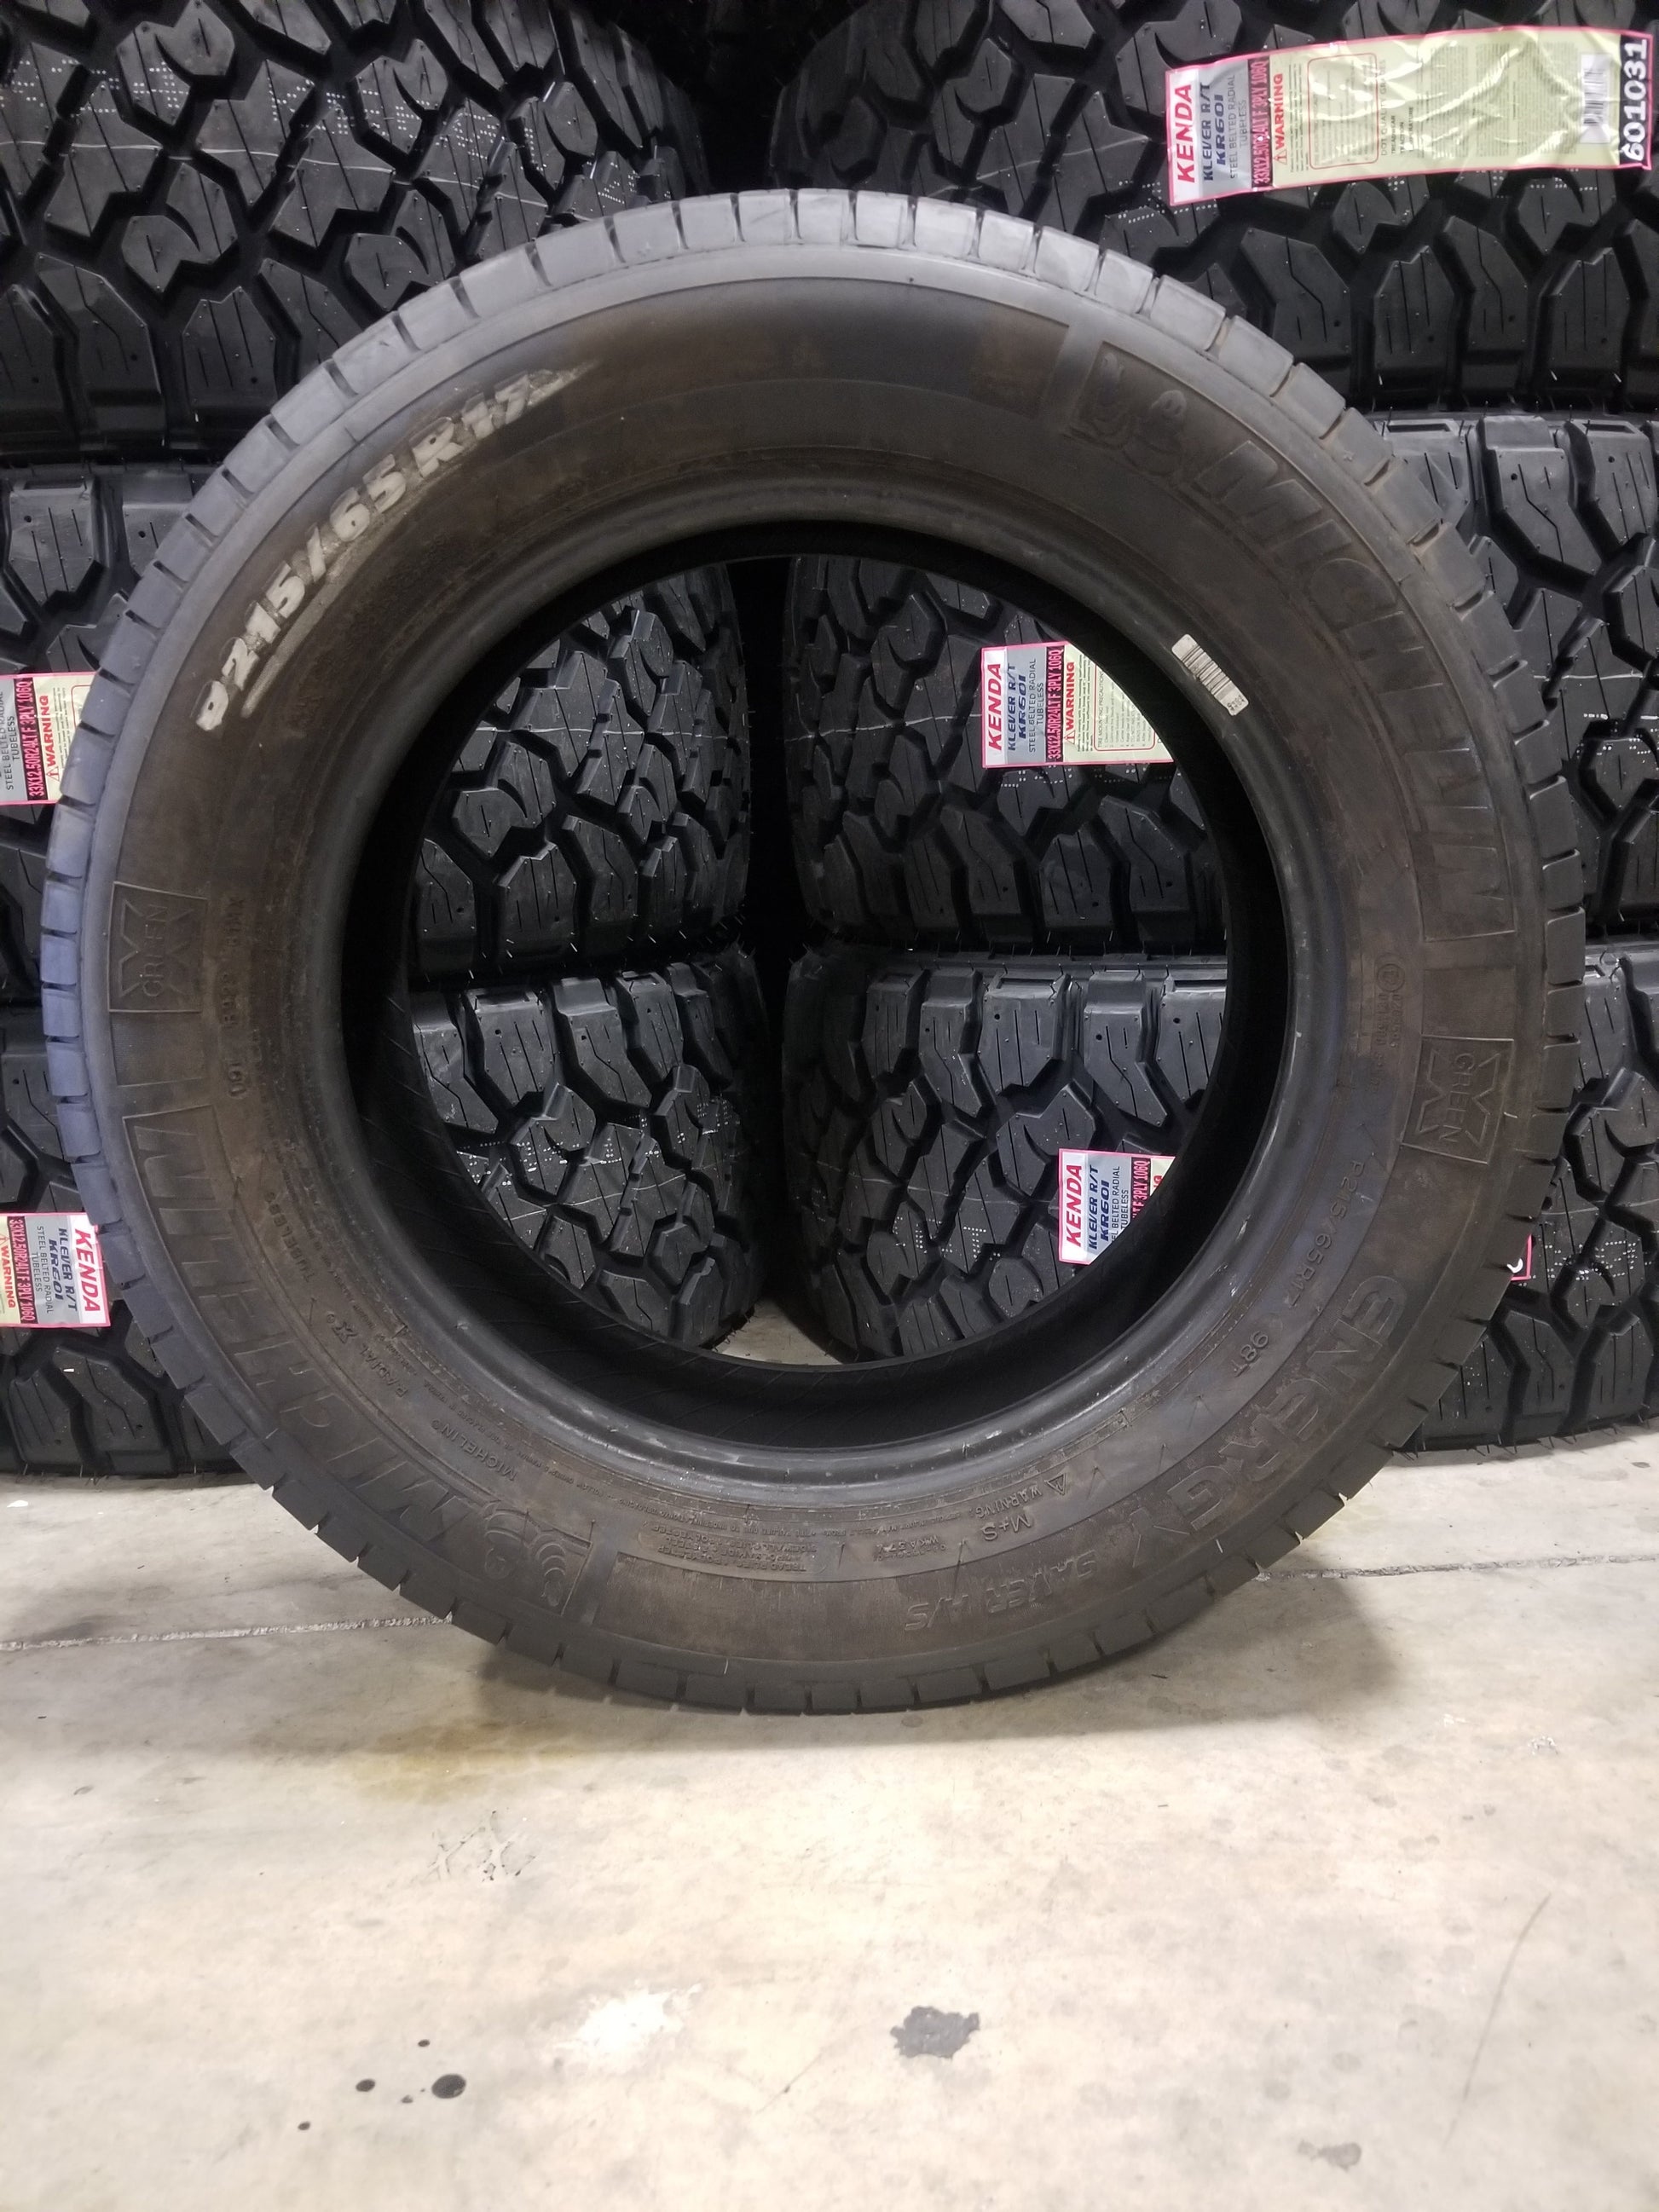 SINGLE 215/65R17 Michelin Energy Saver A/S 98 T 1653 LBS - Used Tires